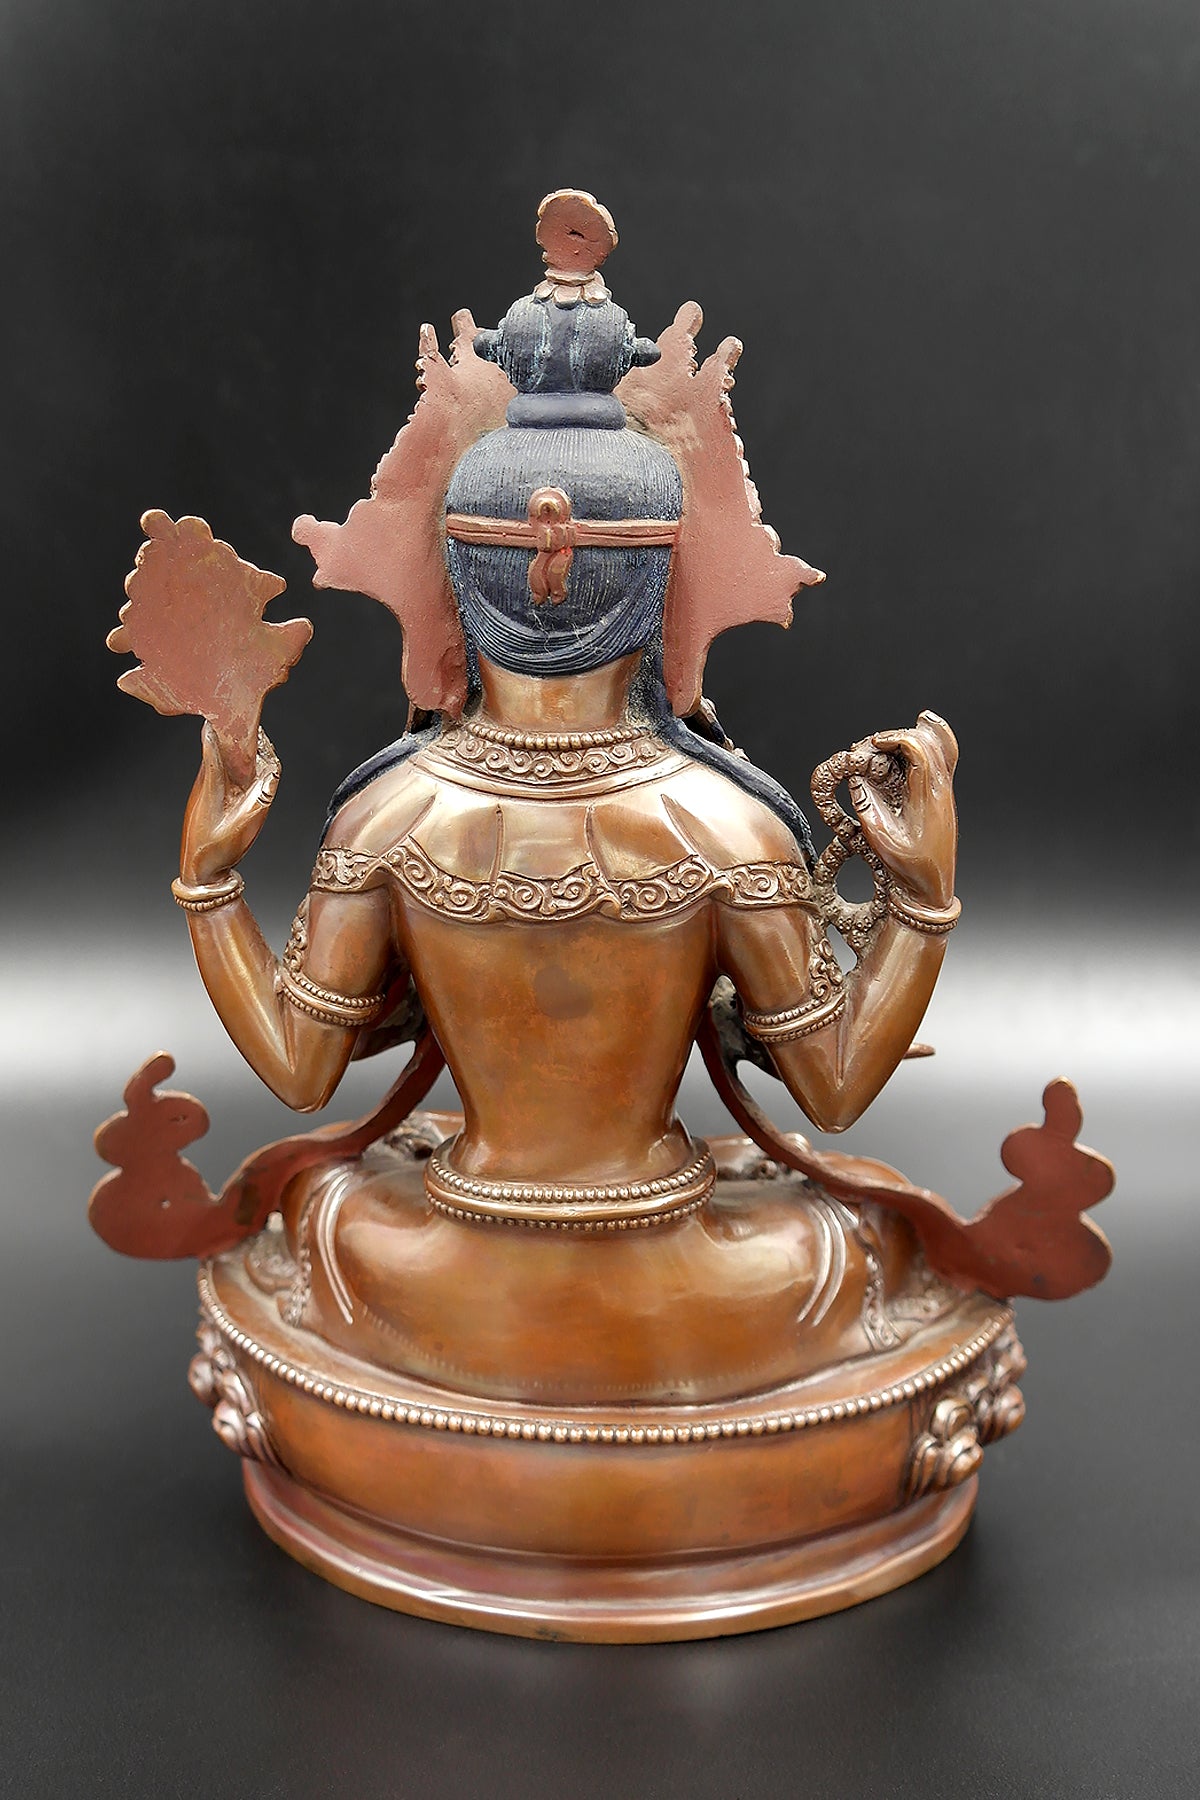 Copper Oxidized and Gold face painted Chenrezig Statue 8"